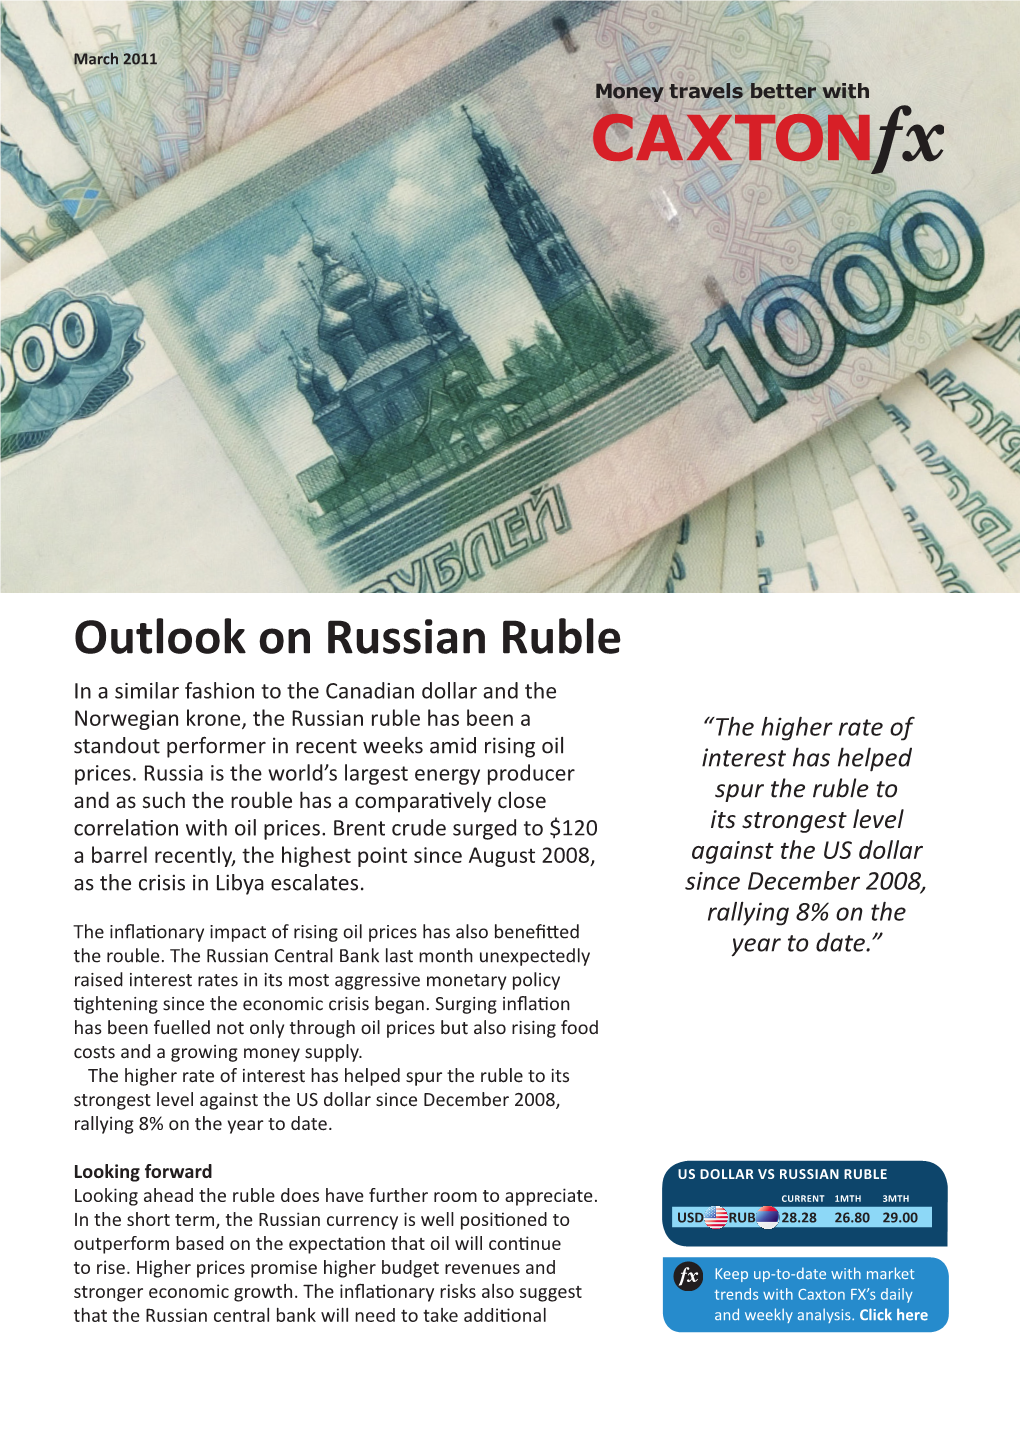 Outlook on Russian Ruble